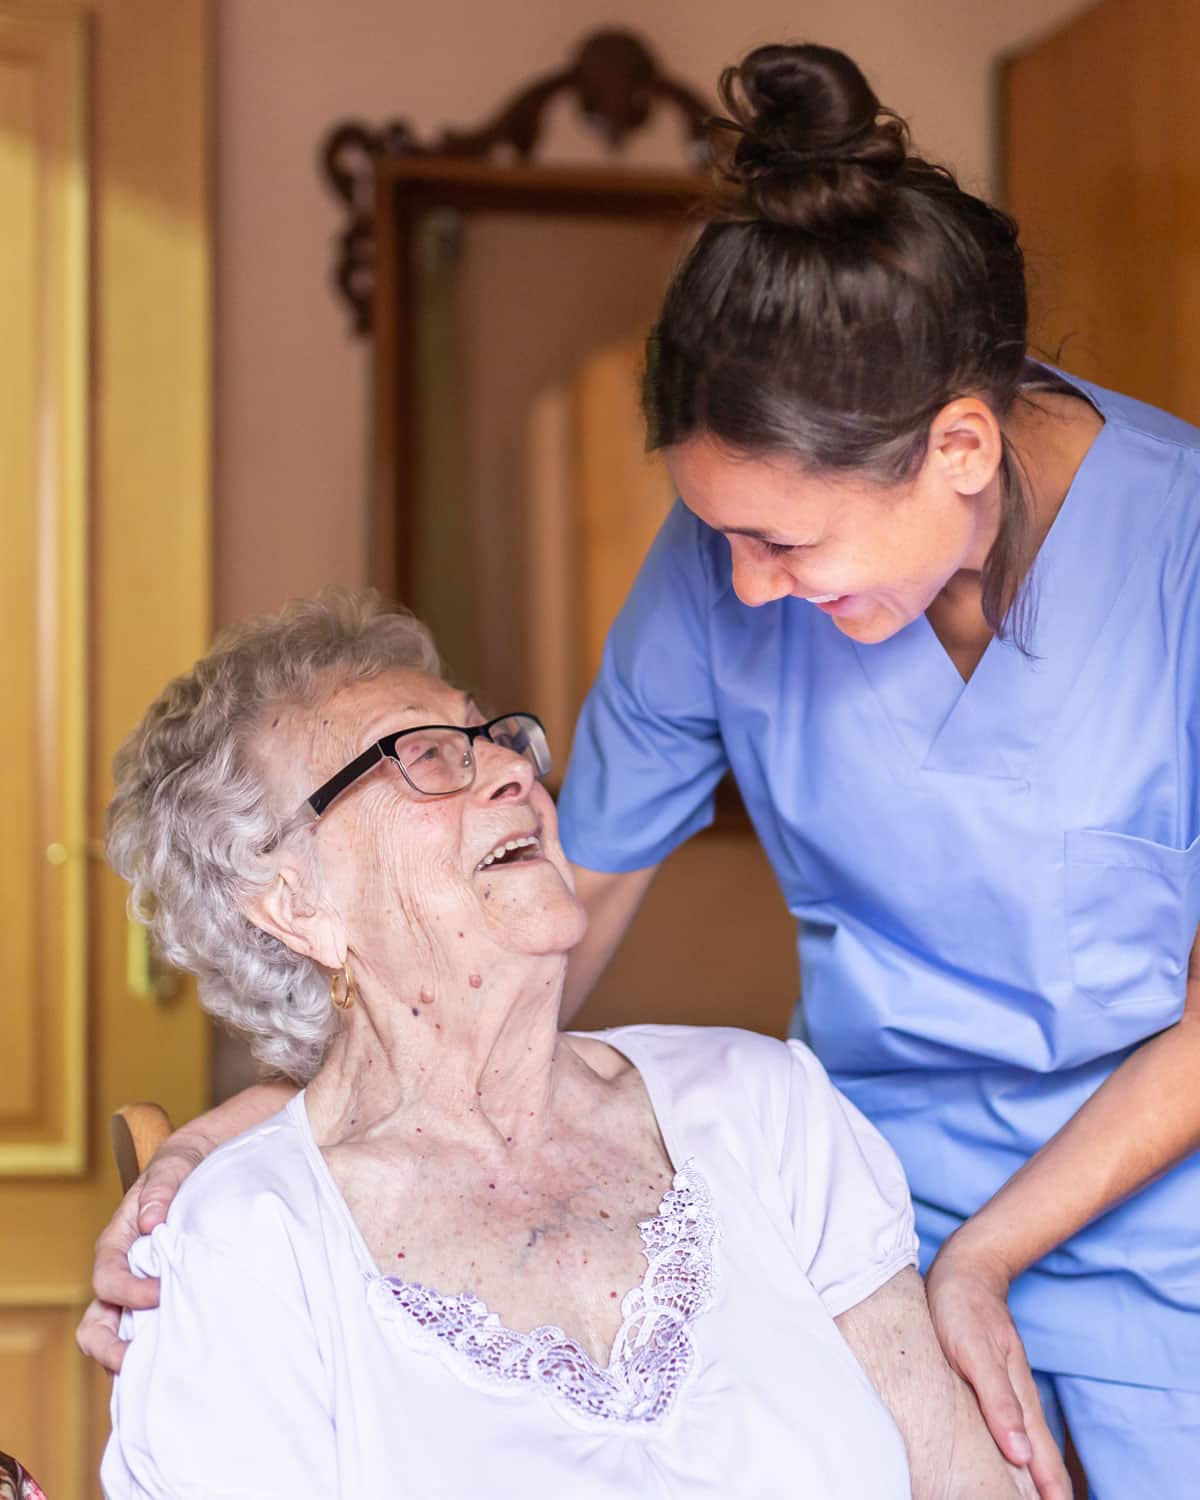 Elderly woman receiving home health care from a nurse